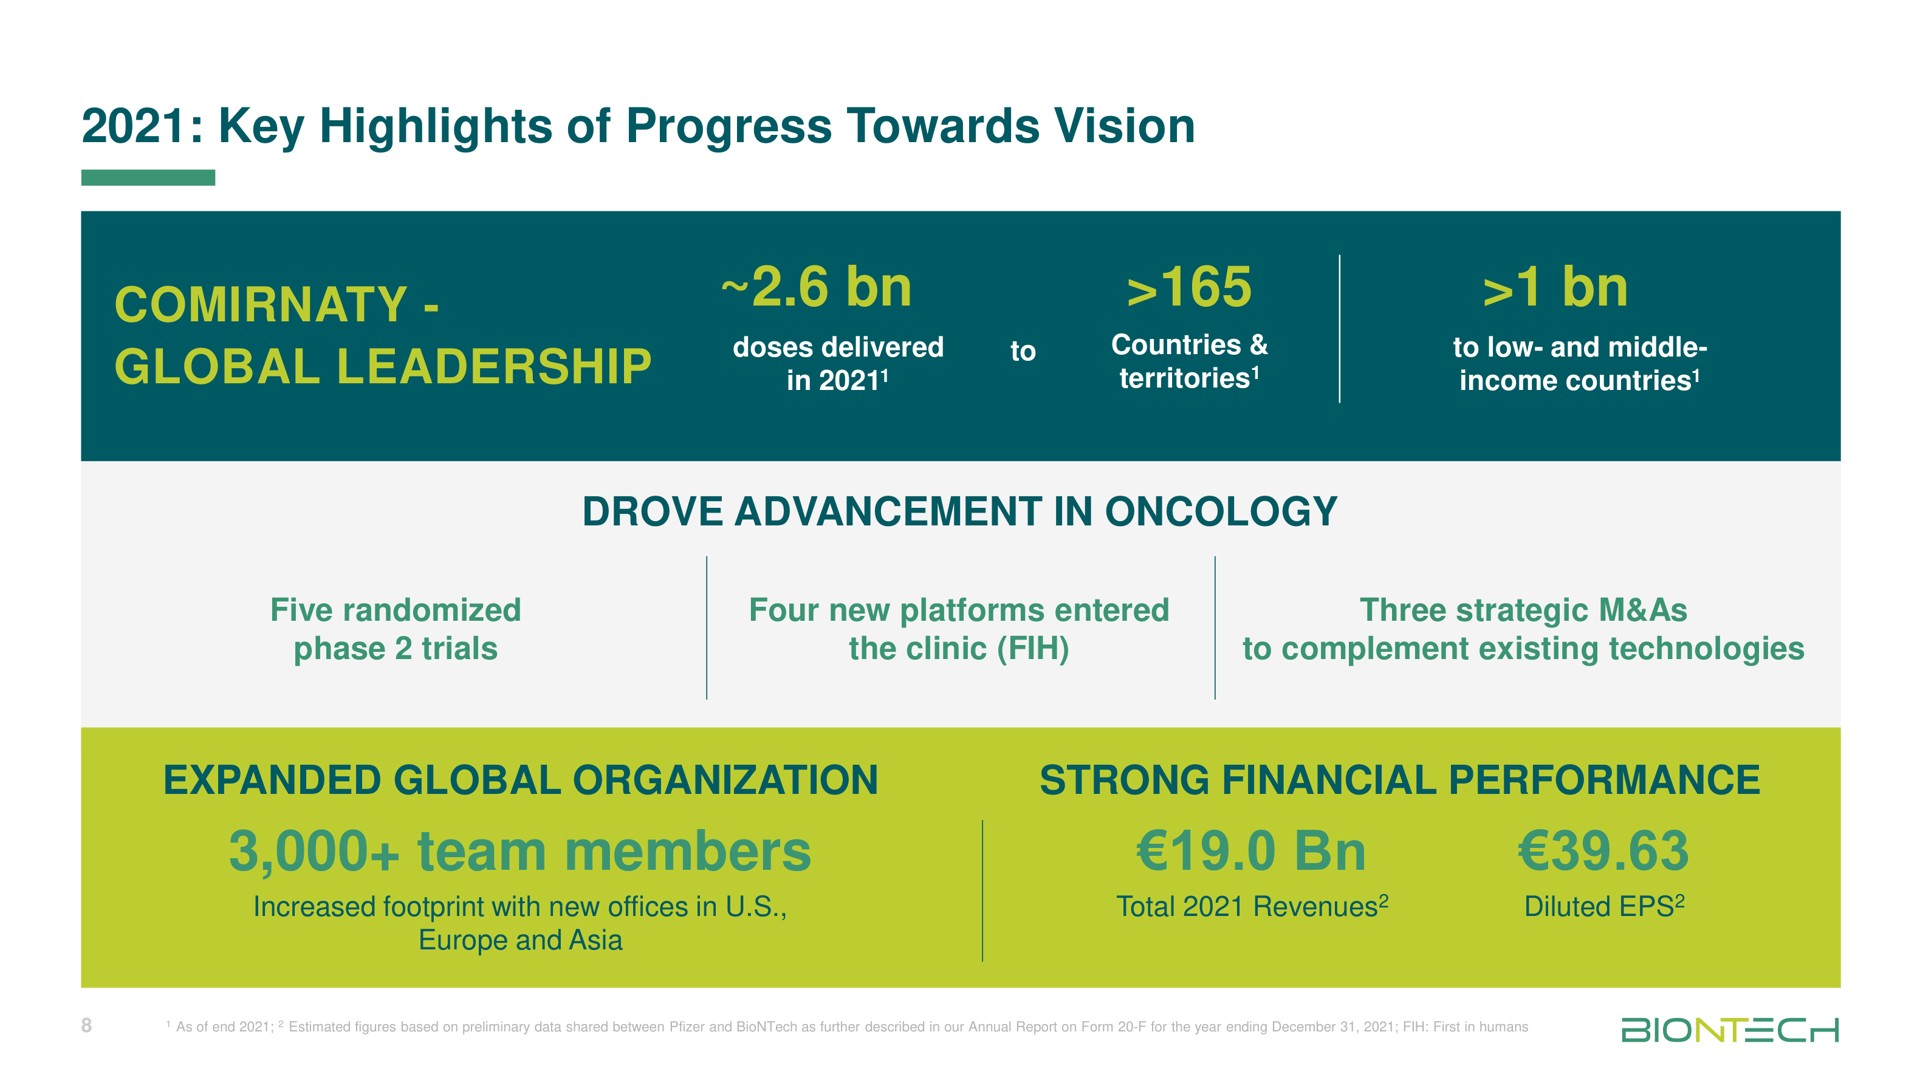 key highlights of progress towards vision global leadership team members to countries mae oda drove advancement in oncology expanded organization strong financial performance | BioNTech